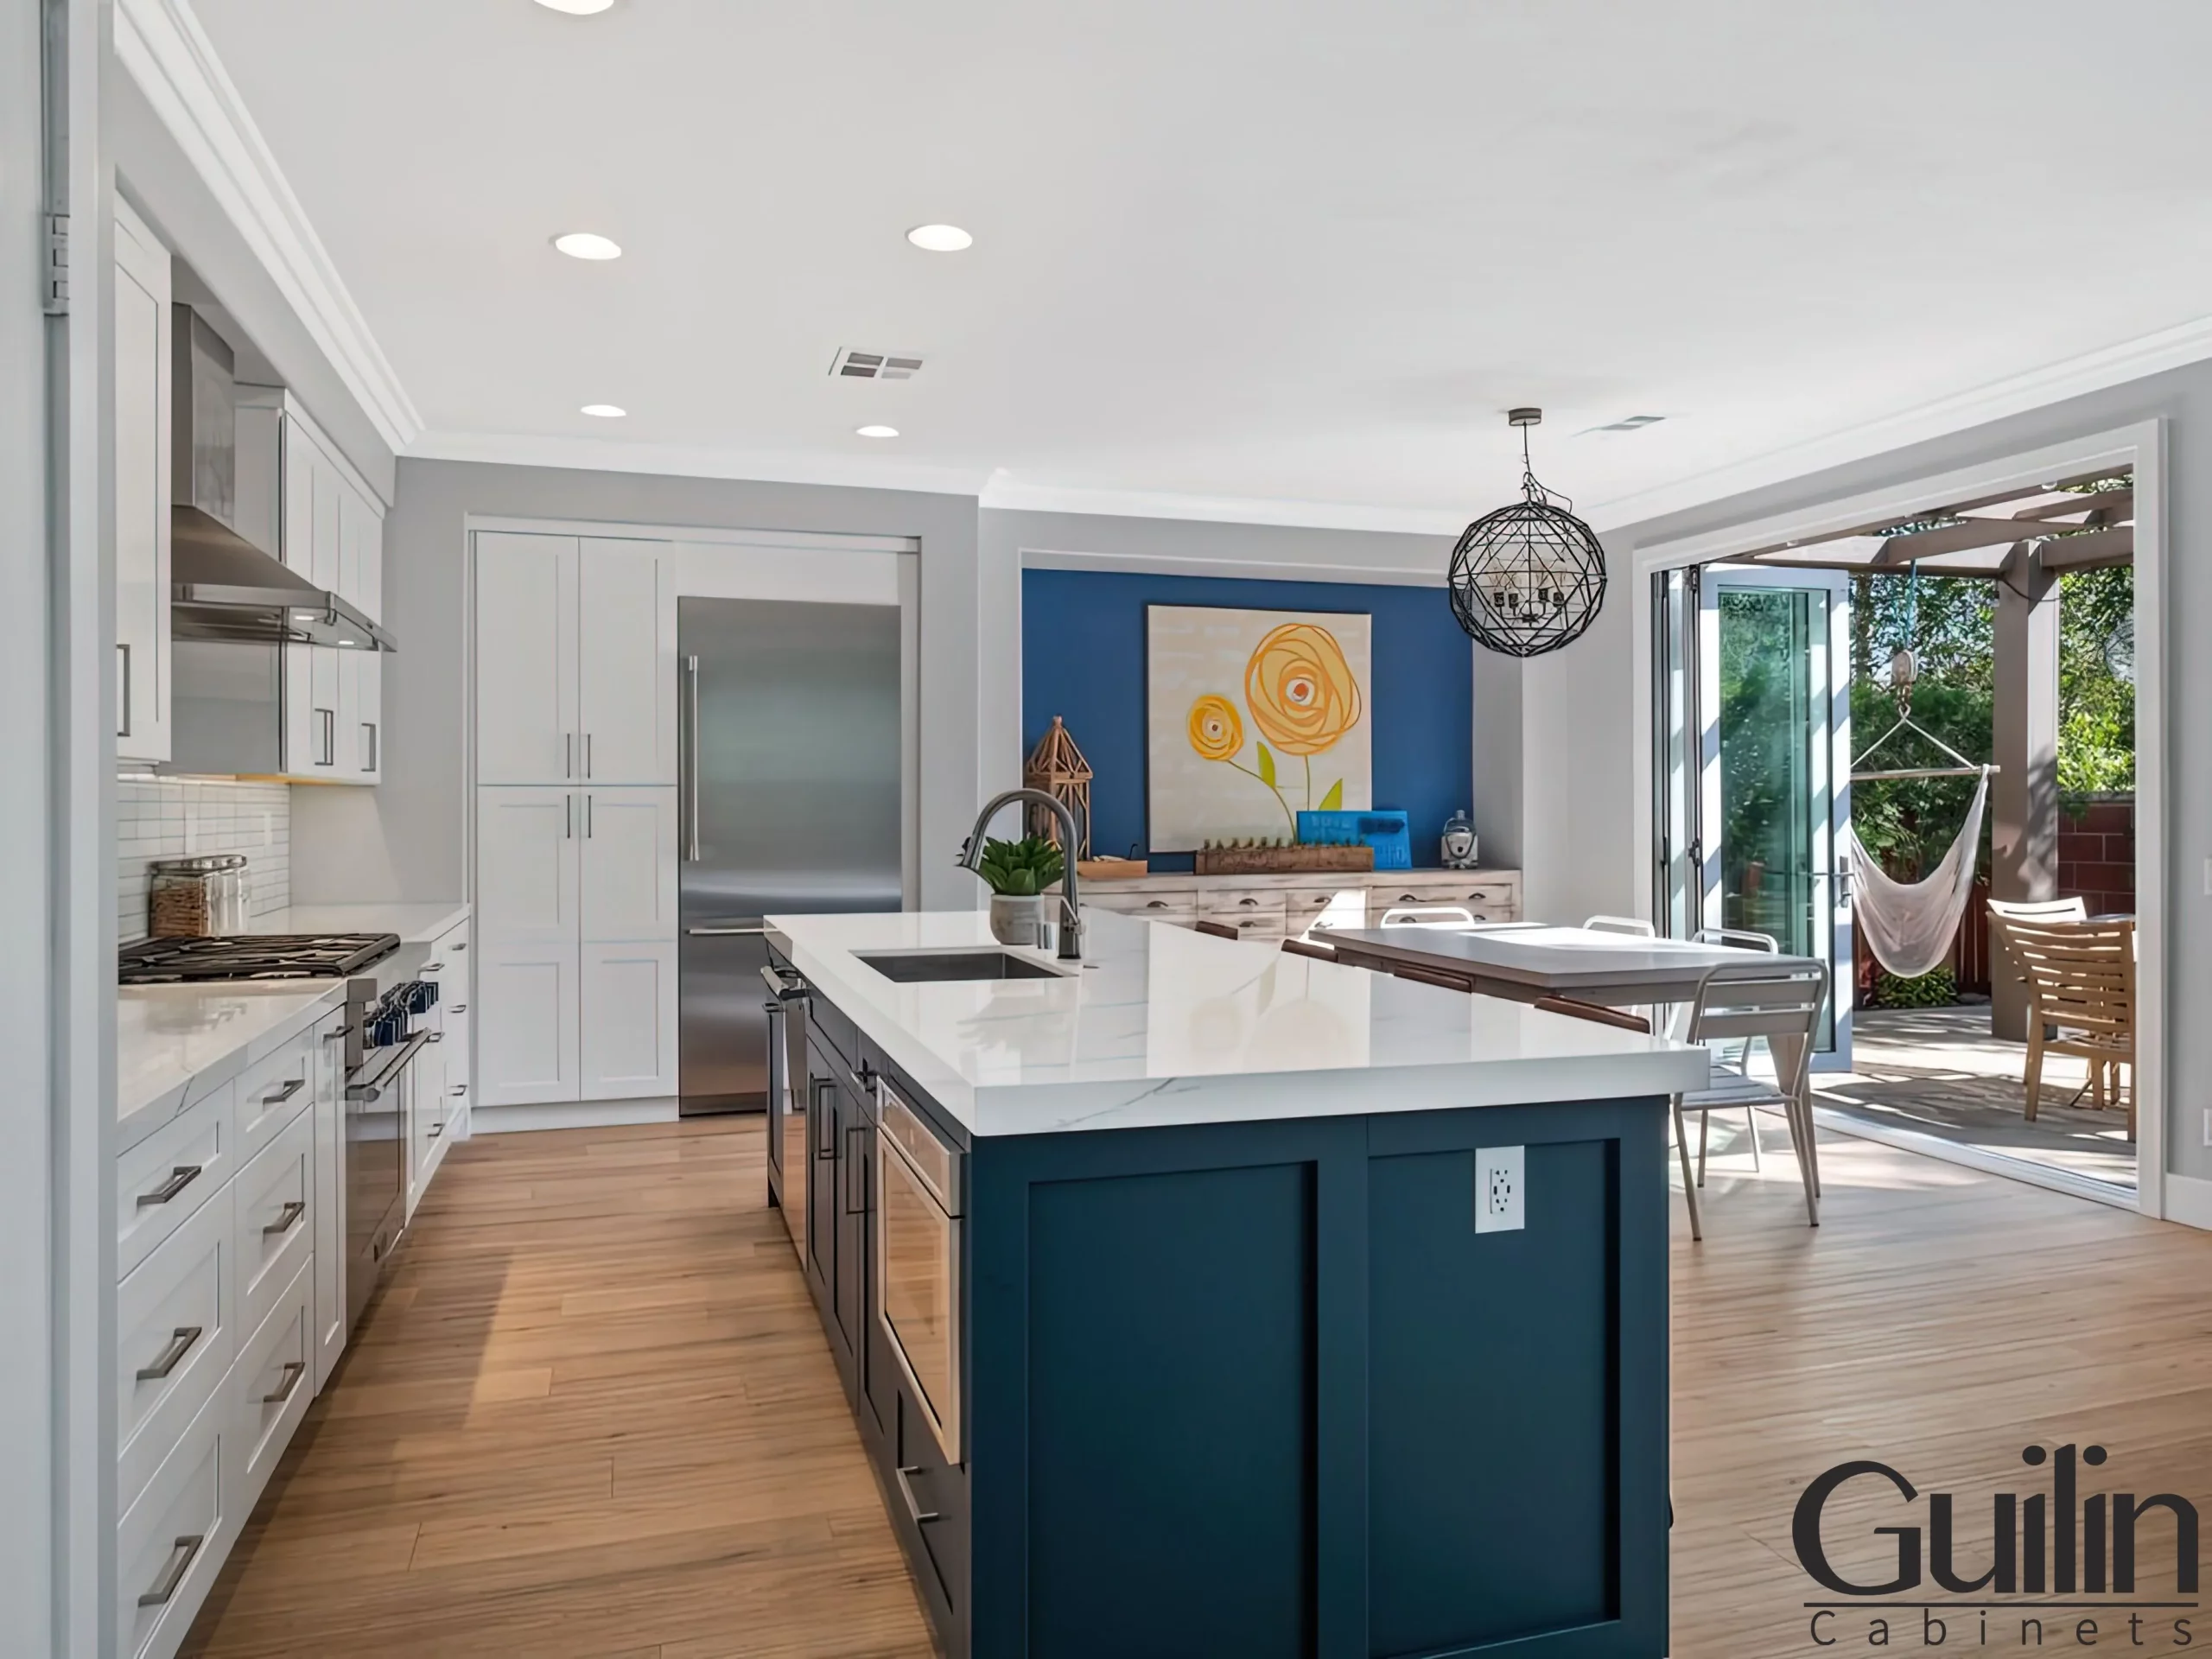 A coastal kitchen style incorporates many features that are design ideas focused on those who want to live a healthy life in fresh air places, open floor plans, and abundant light.